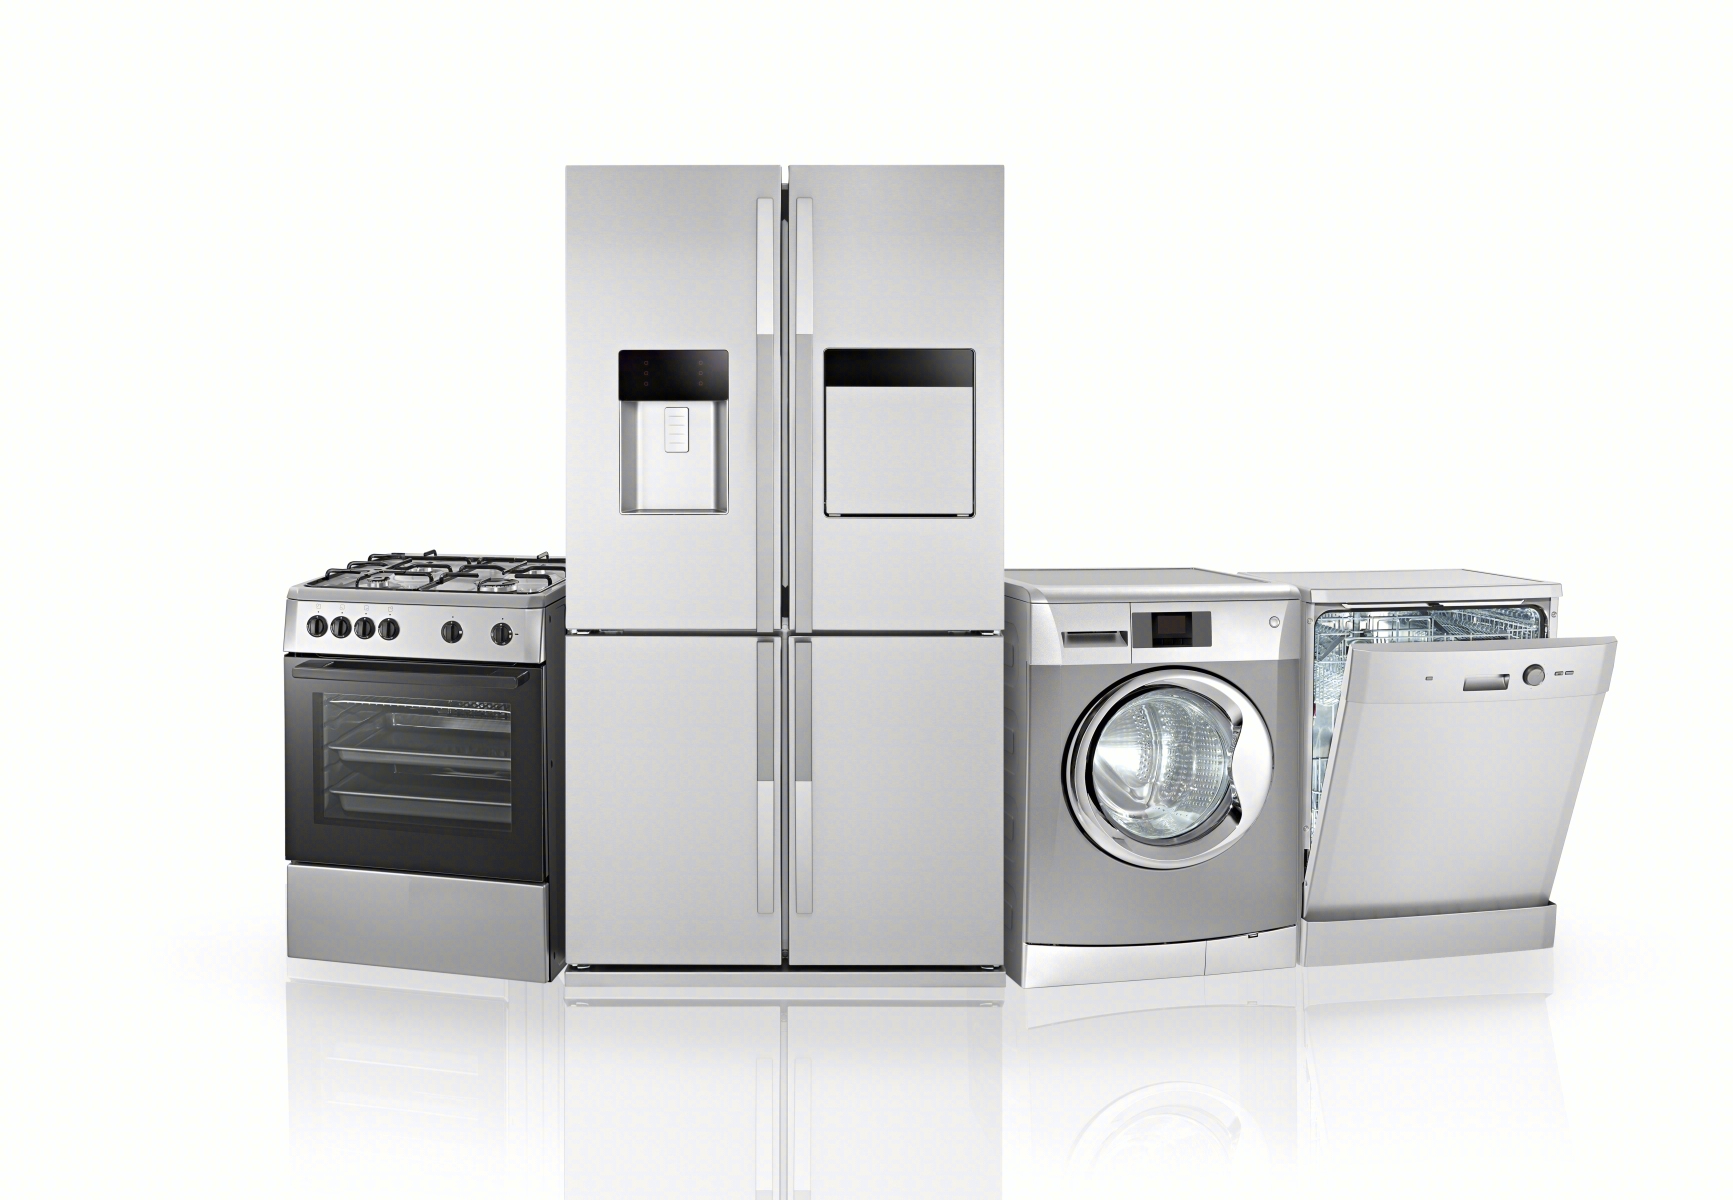 New Home Appliances Preferences on Display during Double 12 JD